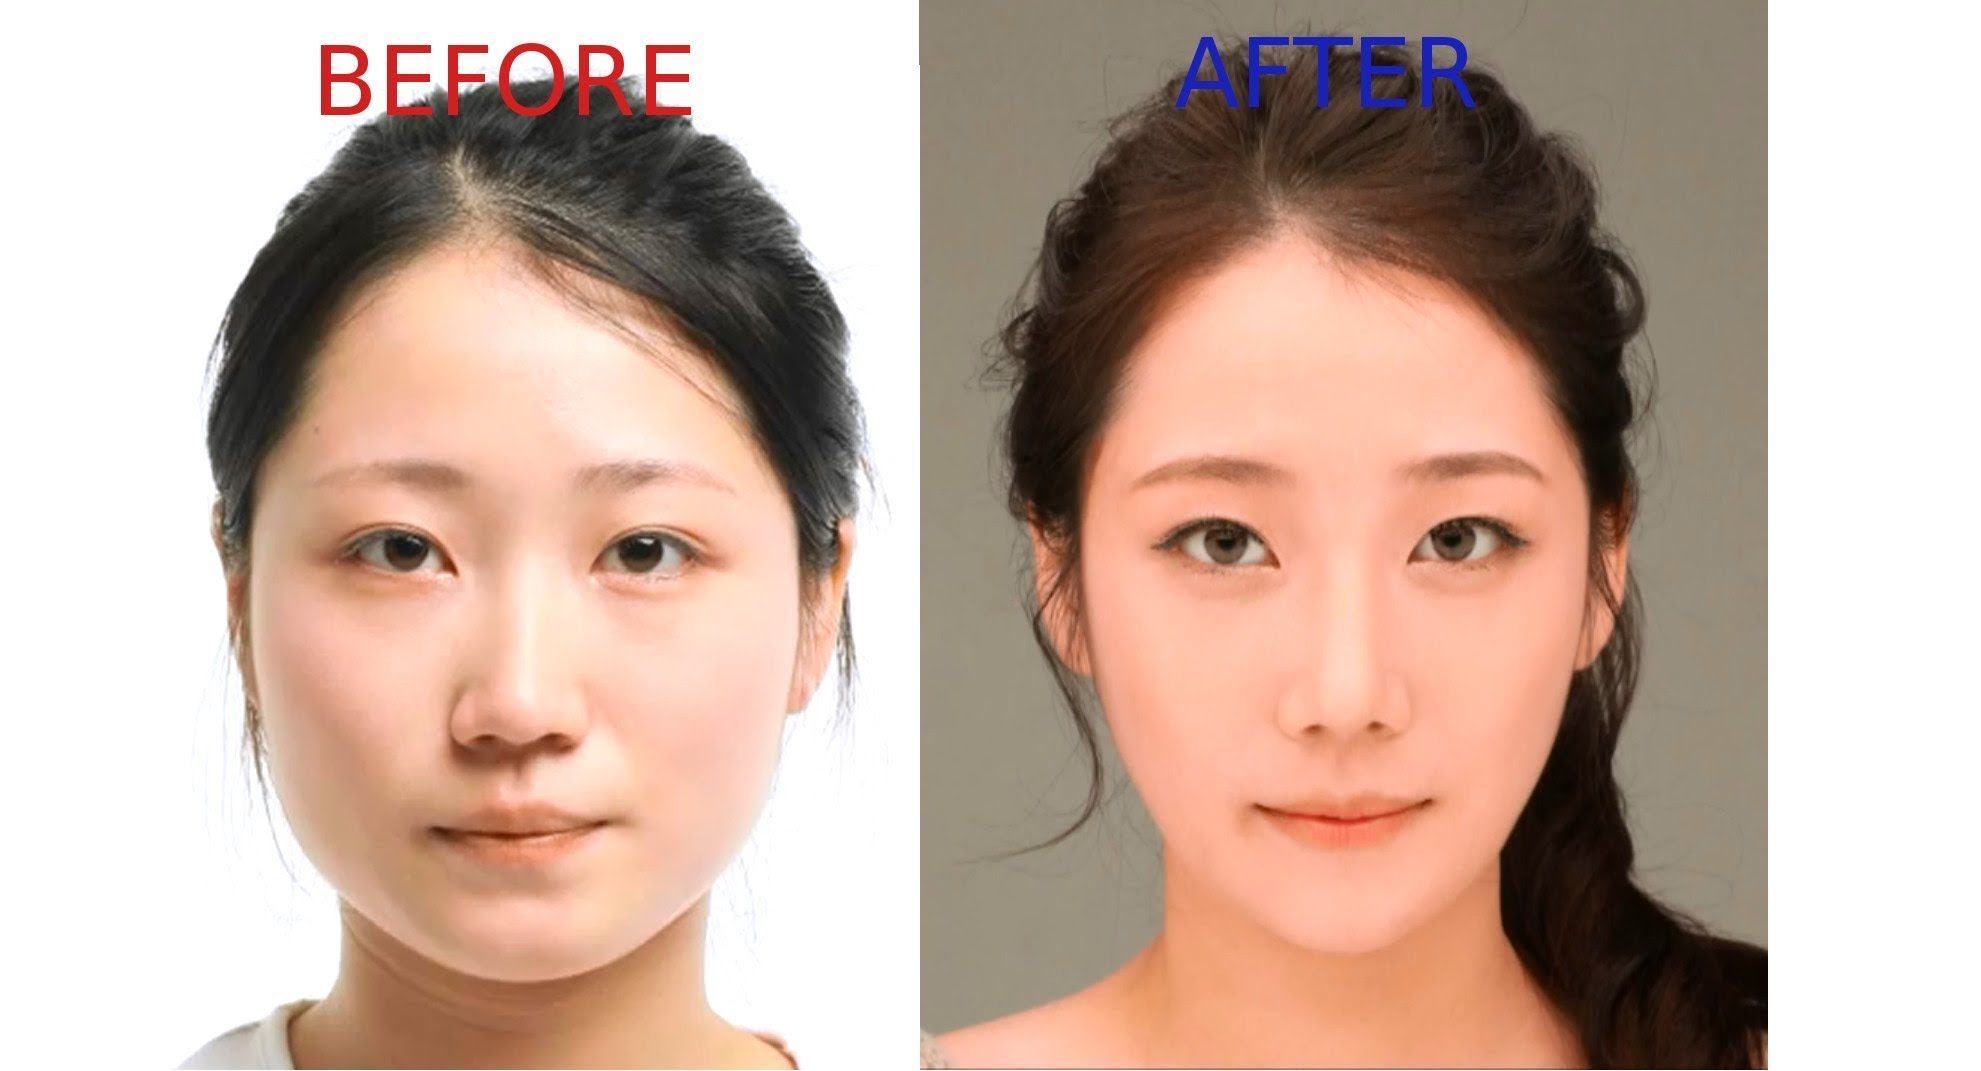 What are the typical costs for different types of plastic surgery?